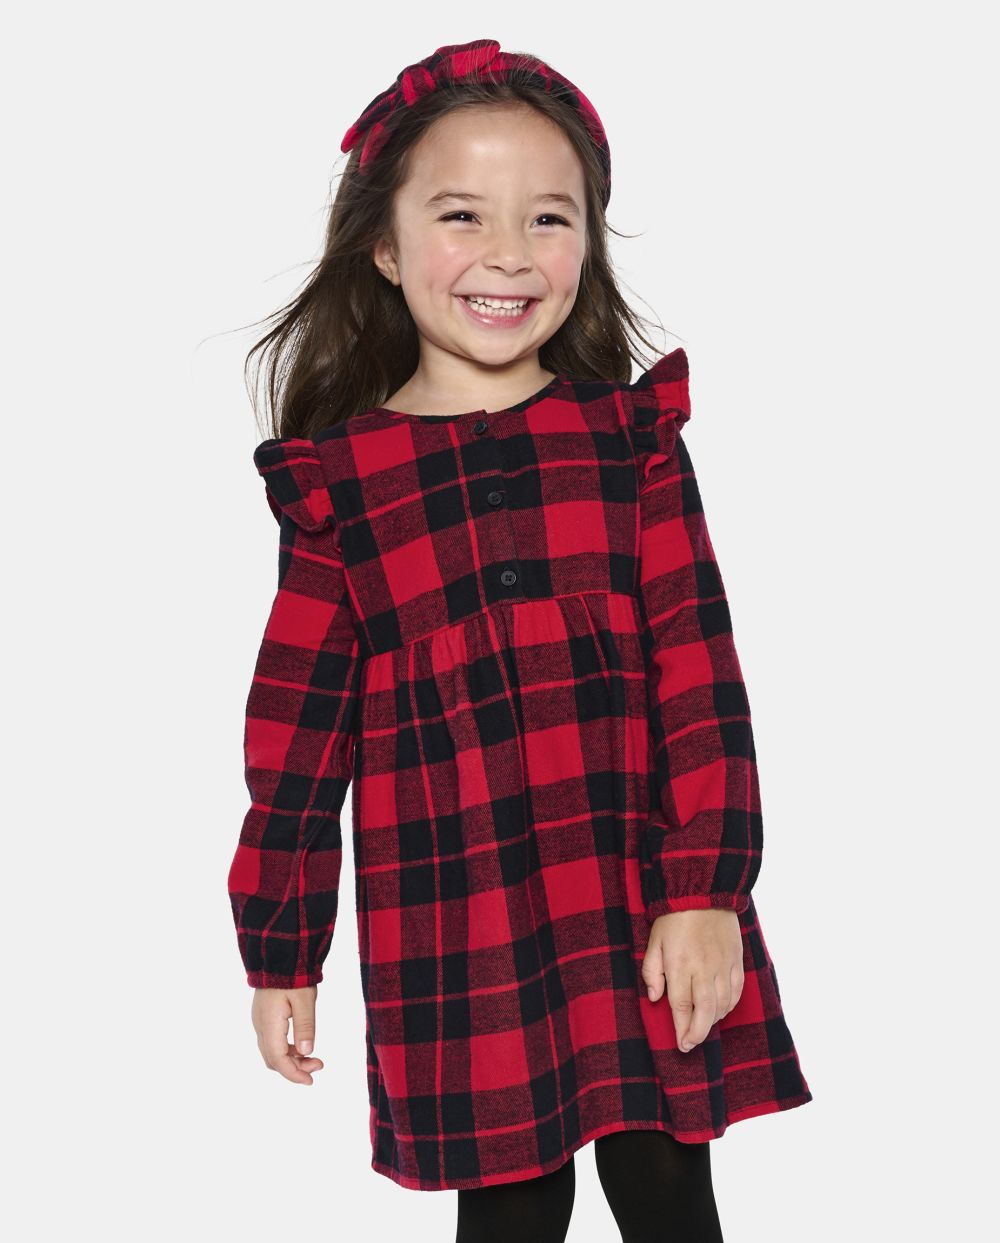 Toddler Baby Crew Neck Above the Knee Button Front Plaid Print Flutter Long Sleeves Shirt Dress